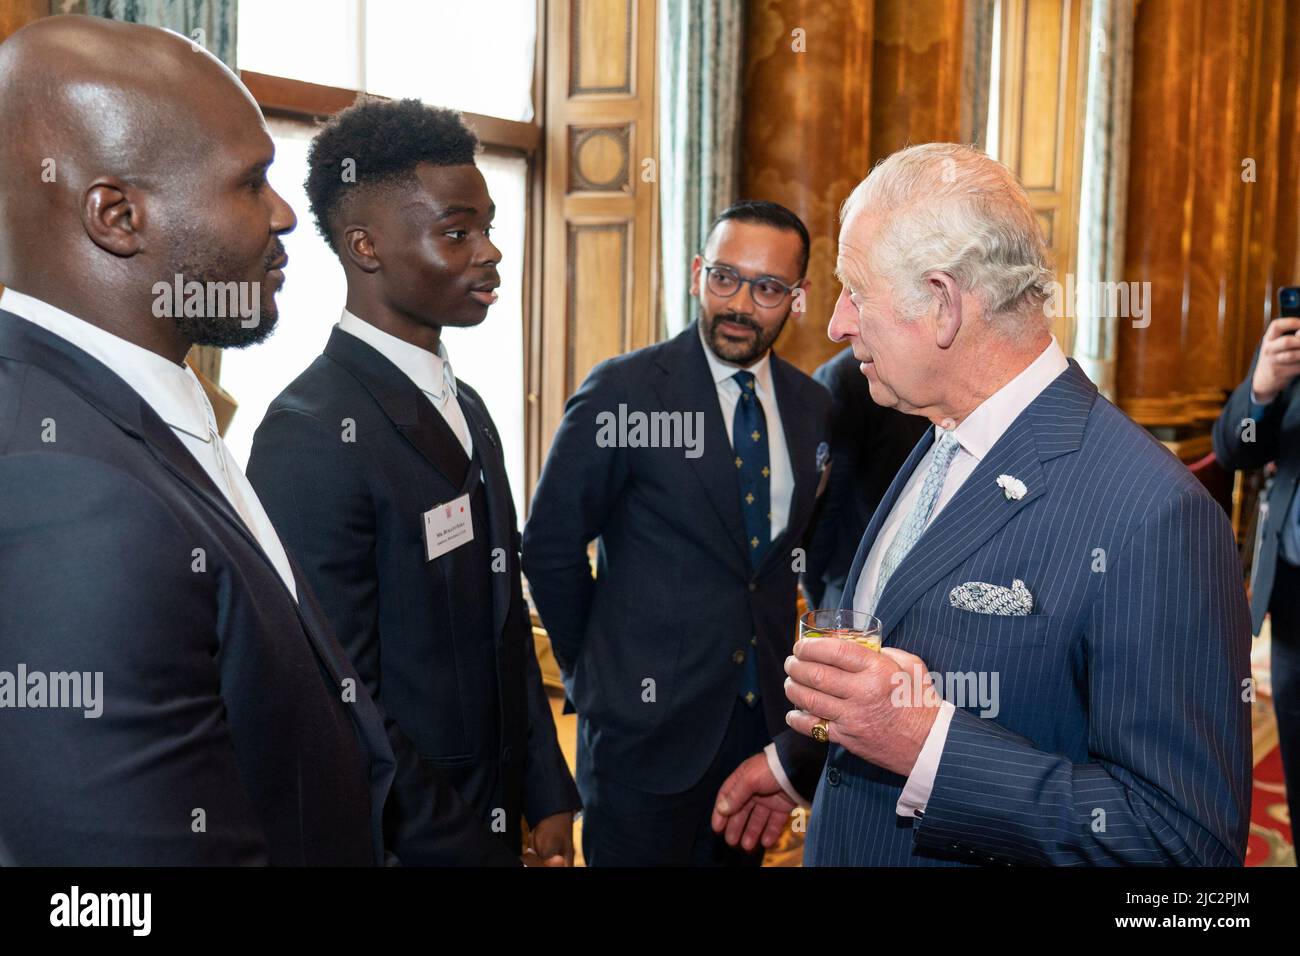 Britain's Prince Charles meets footballer Bukayo Saka, while he attends a reception celebrating the Commonwealth Diaspora of the United Kingdom, in London, Britain June 9, 2022. Dominic Lipinski/PA Wire/Pool via REUTERS Stock Photo